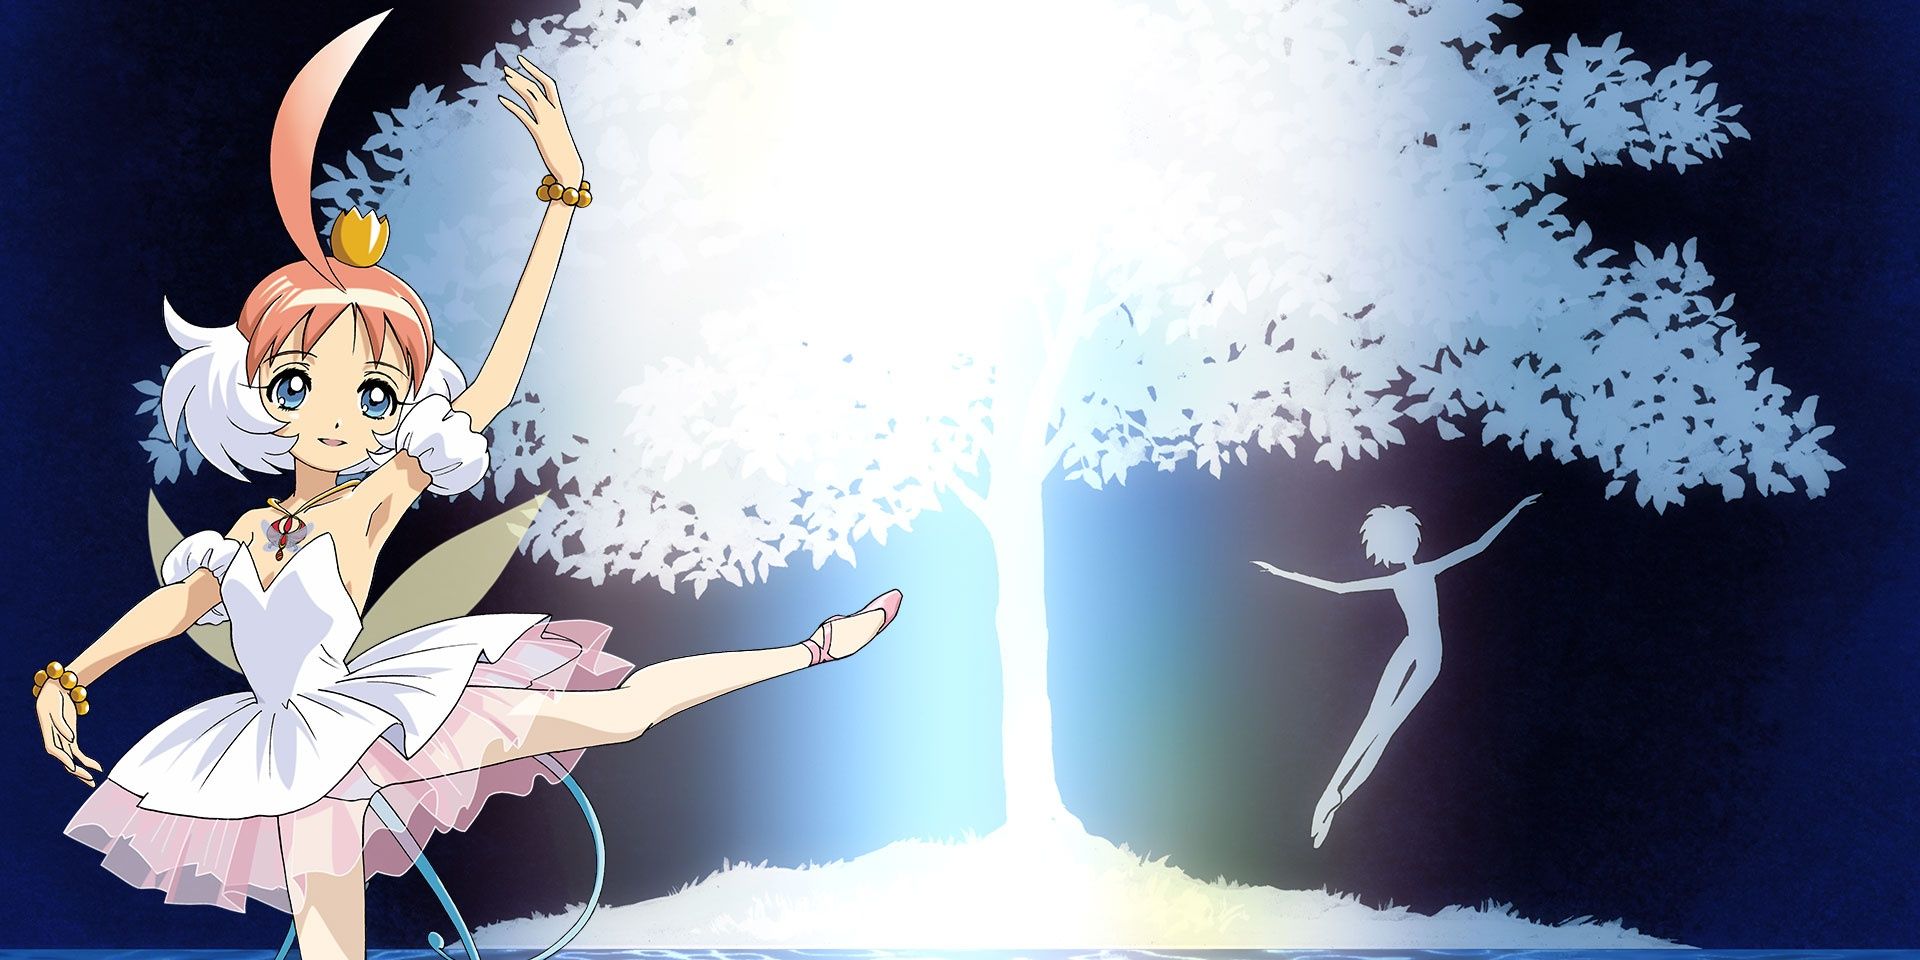 Duck in human form, dancing ballet in front of a glowing tree in Princess Tutu.